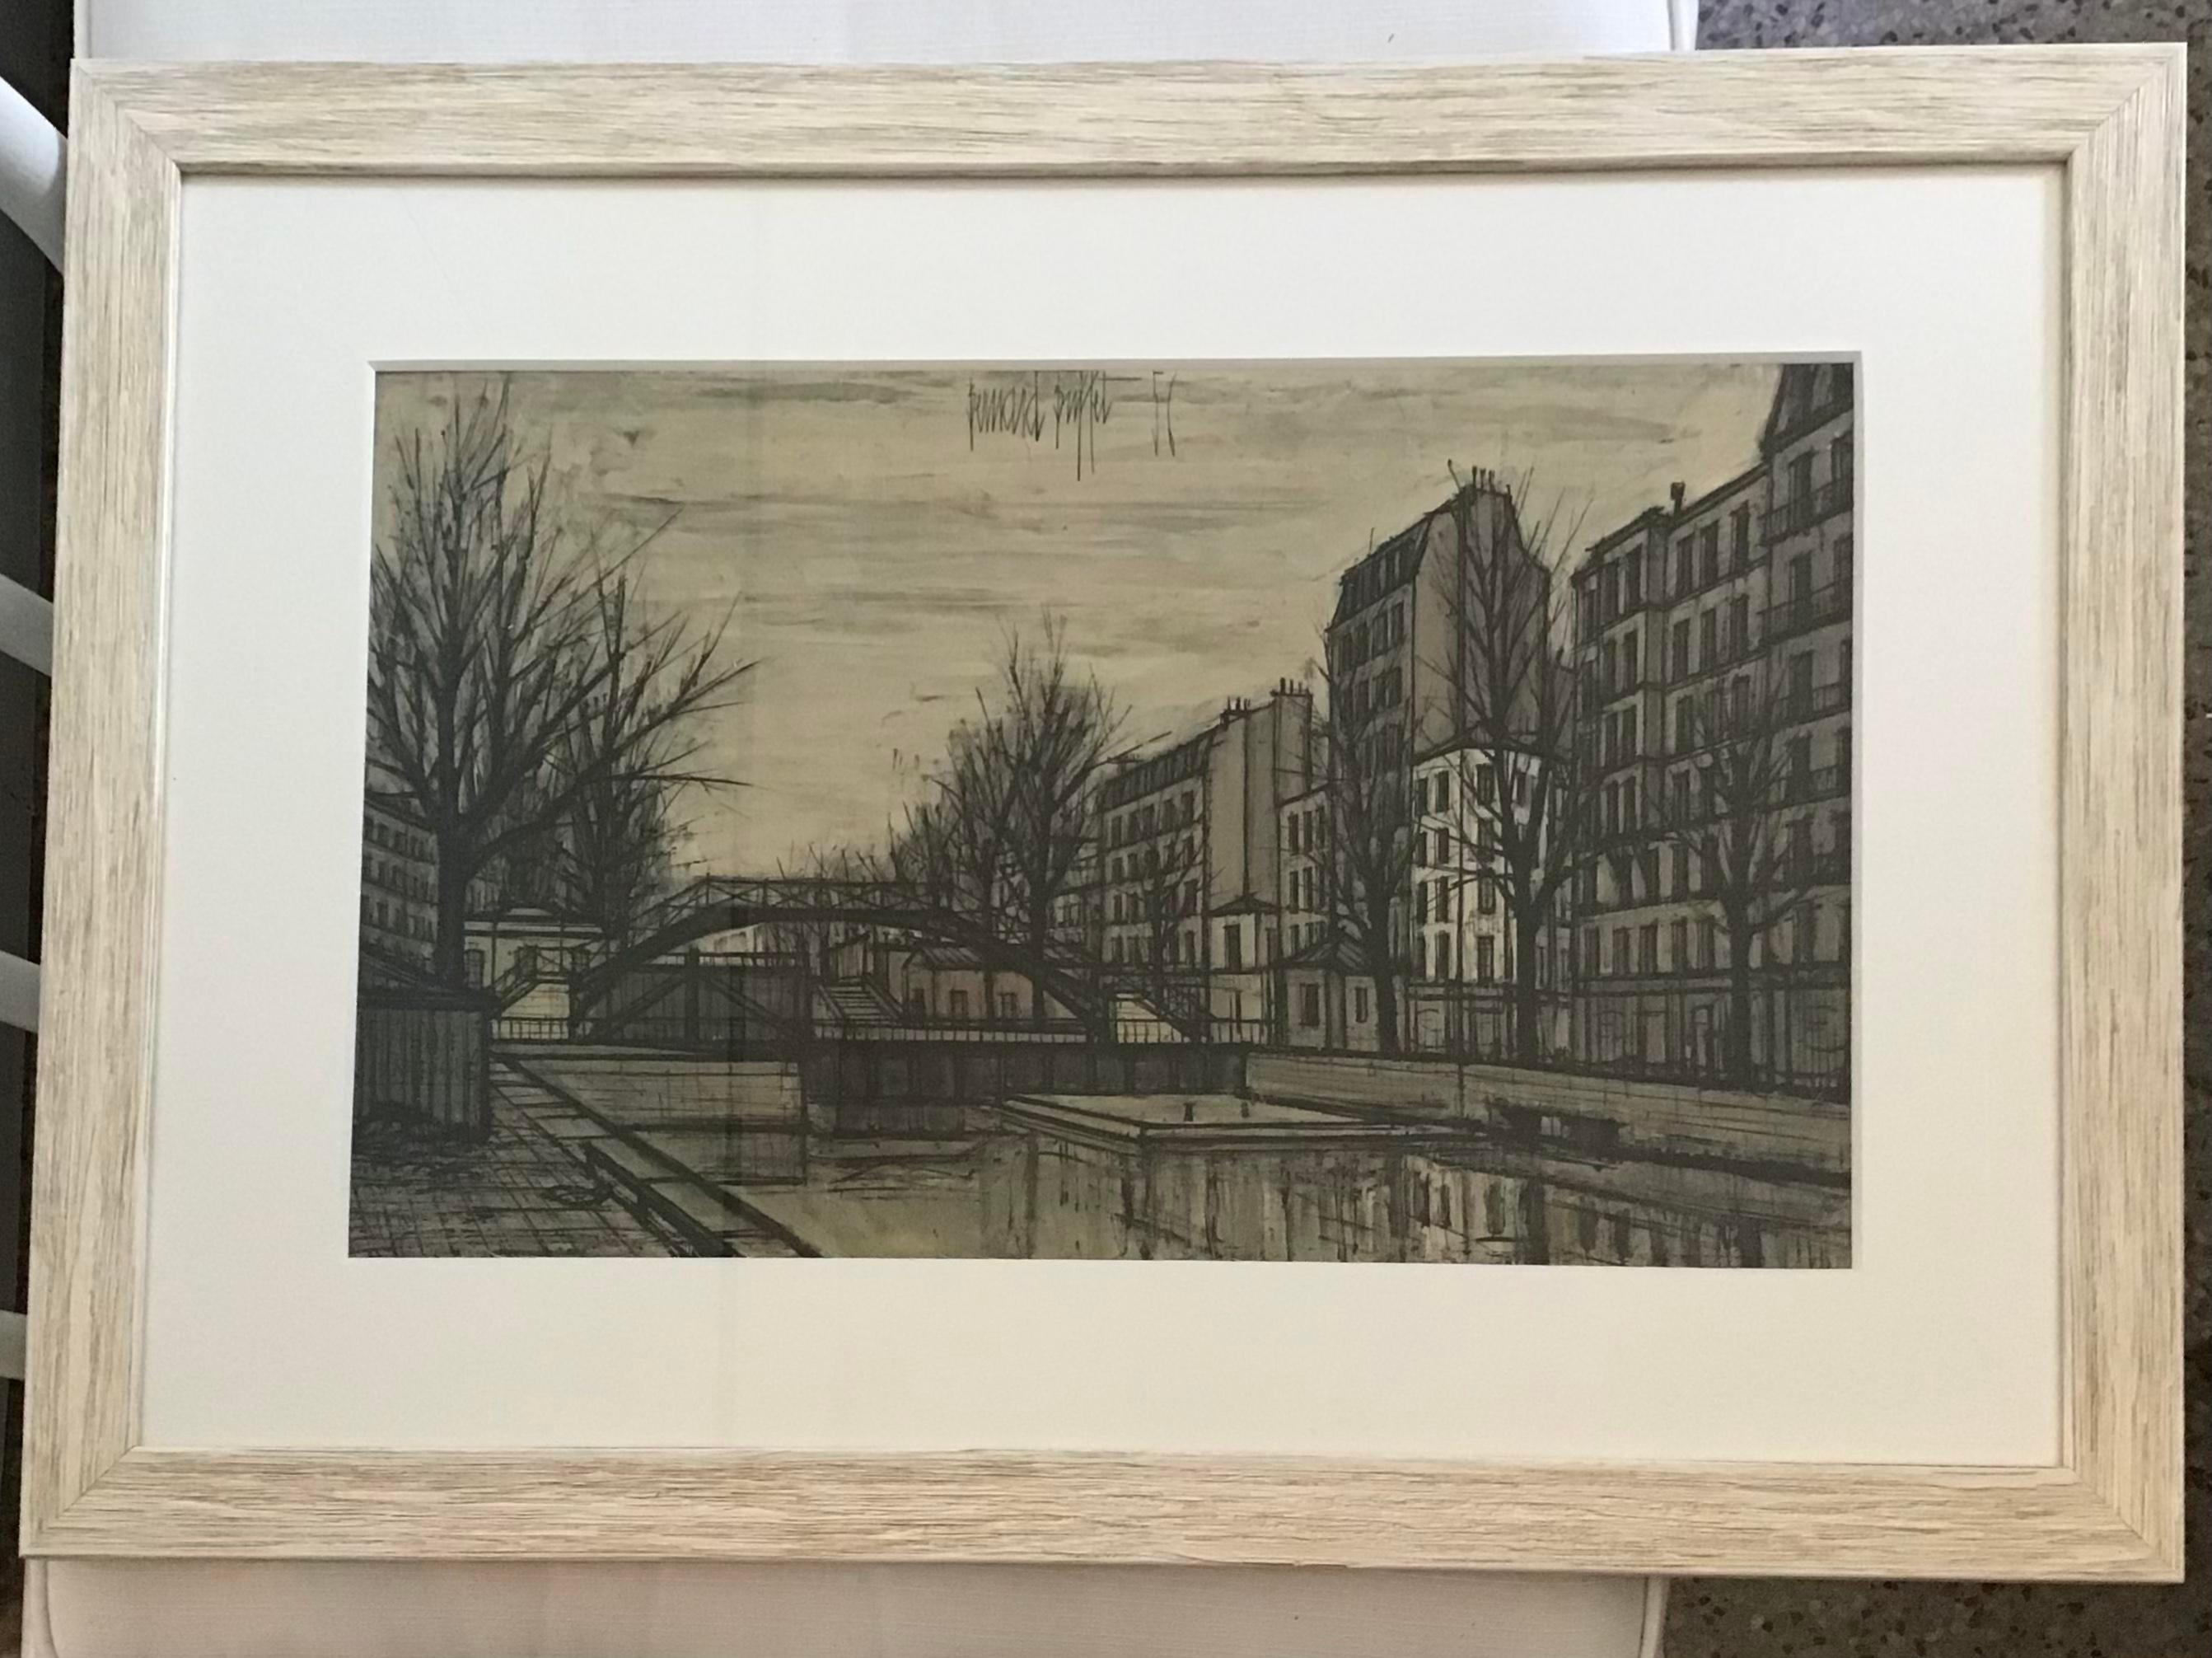 Wonderful Bernard Buffet signed lithograph of Paris in a new white washed frame. The Buffet Paris scenes are very rare.